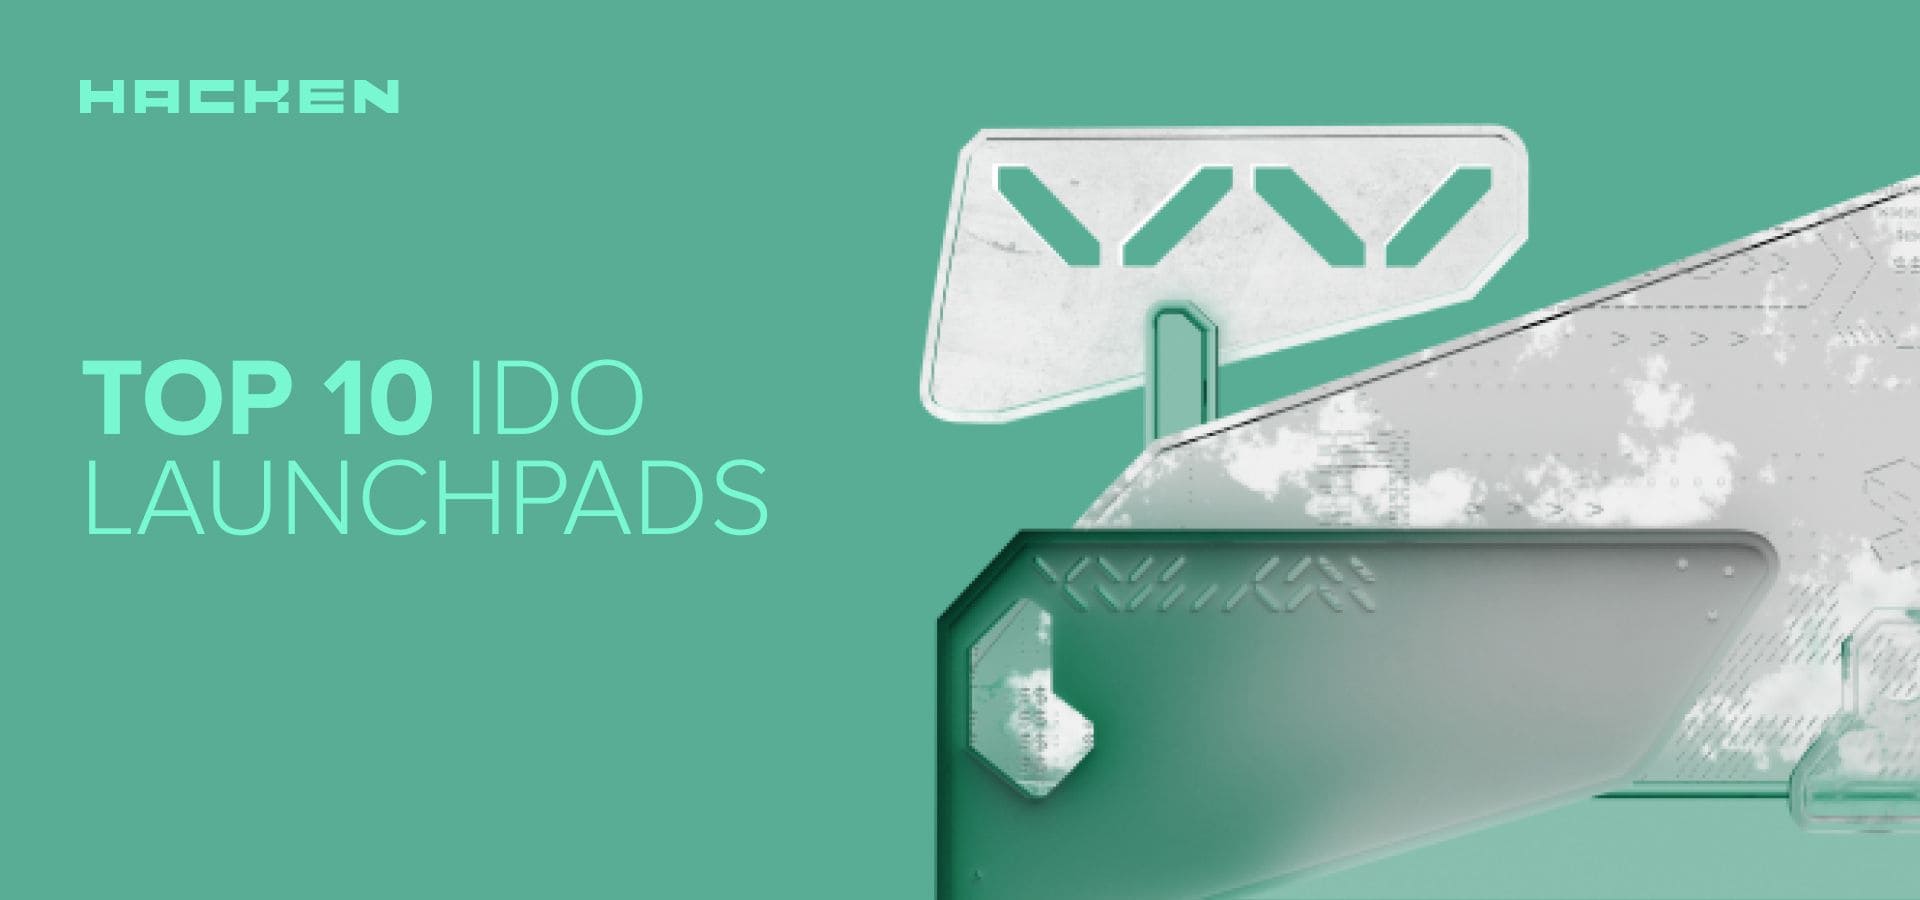 Top-10 IDO launchpads for Web3 projects and investors